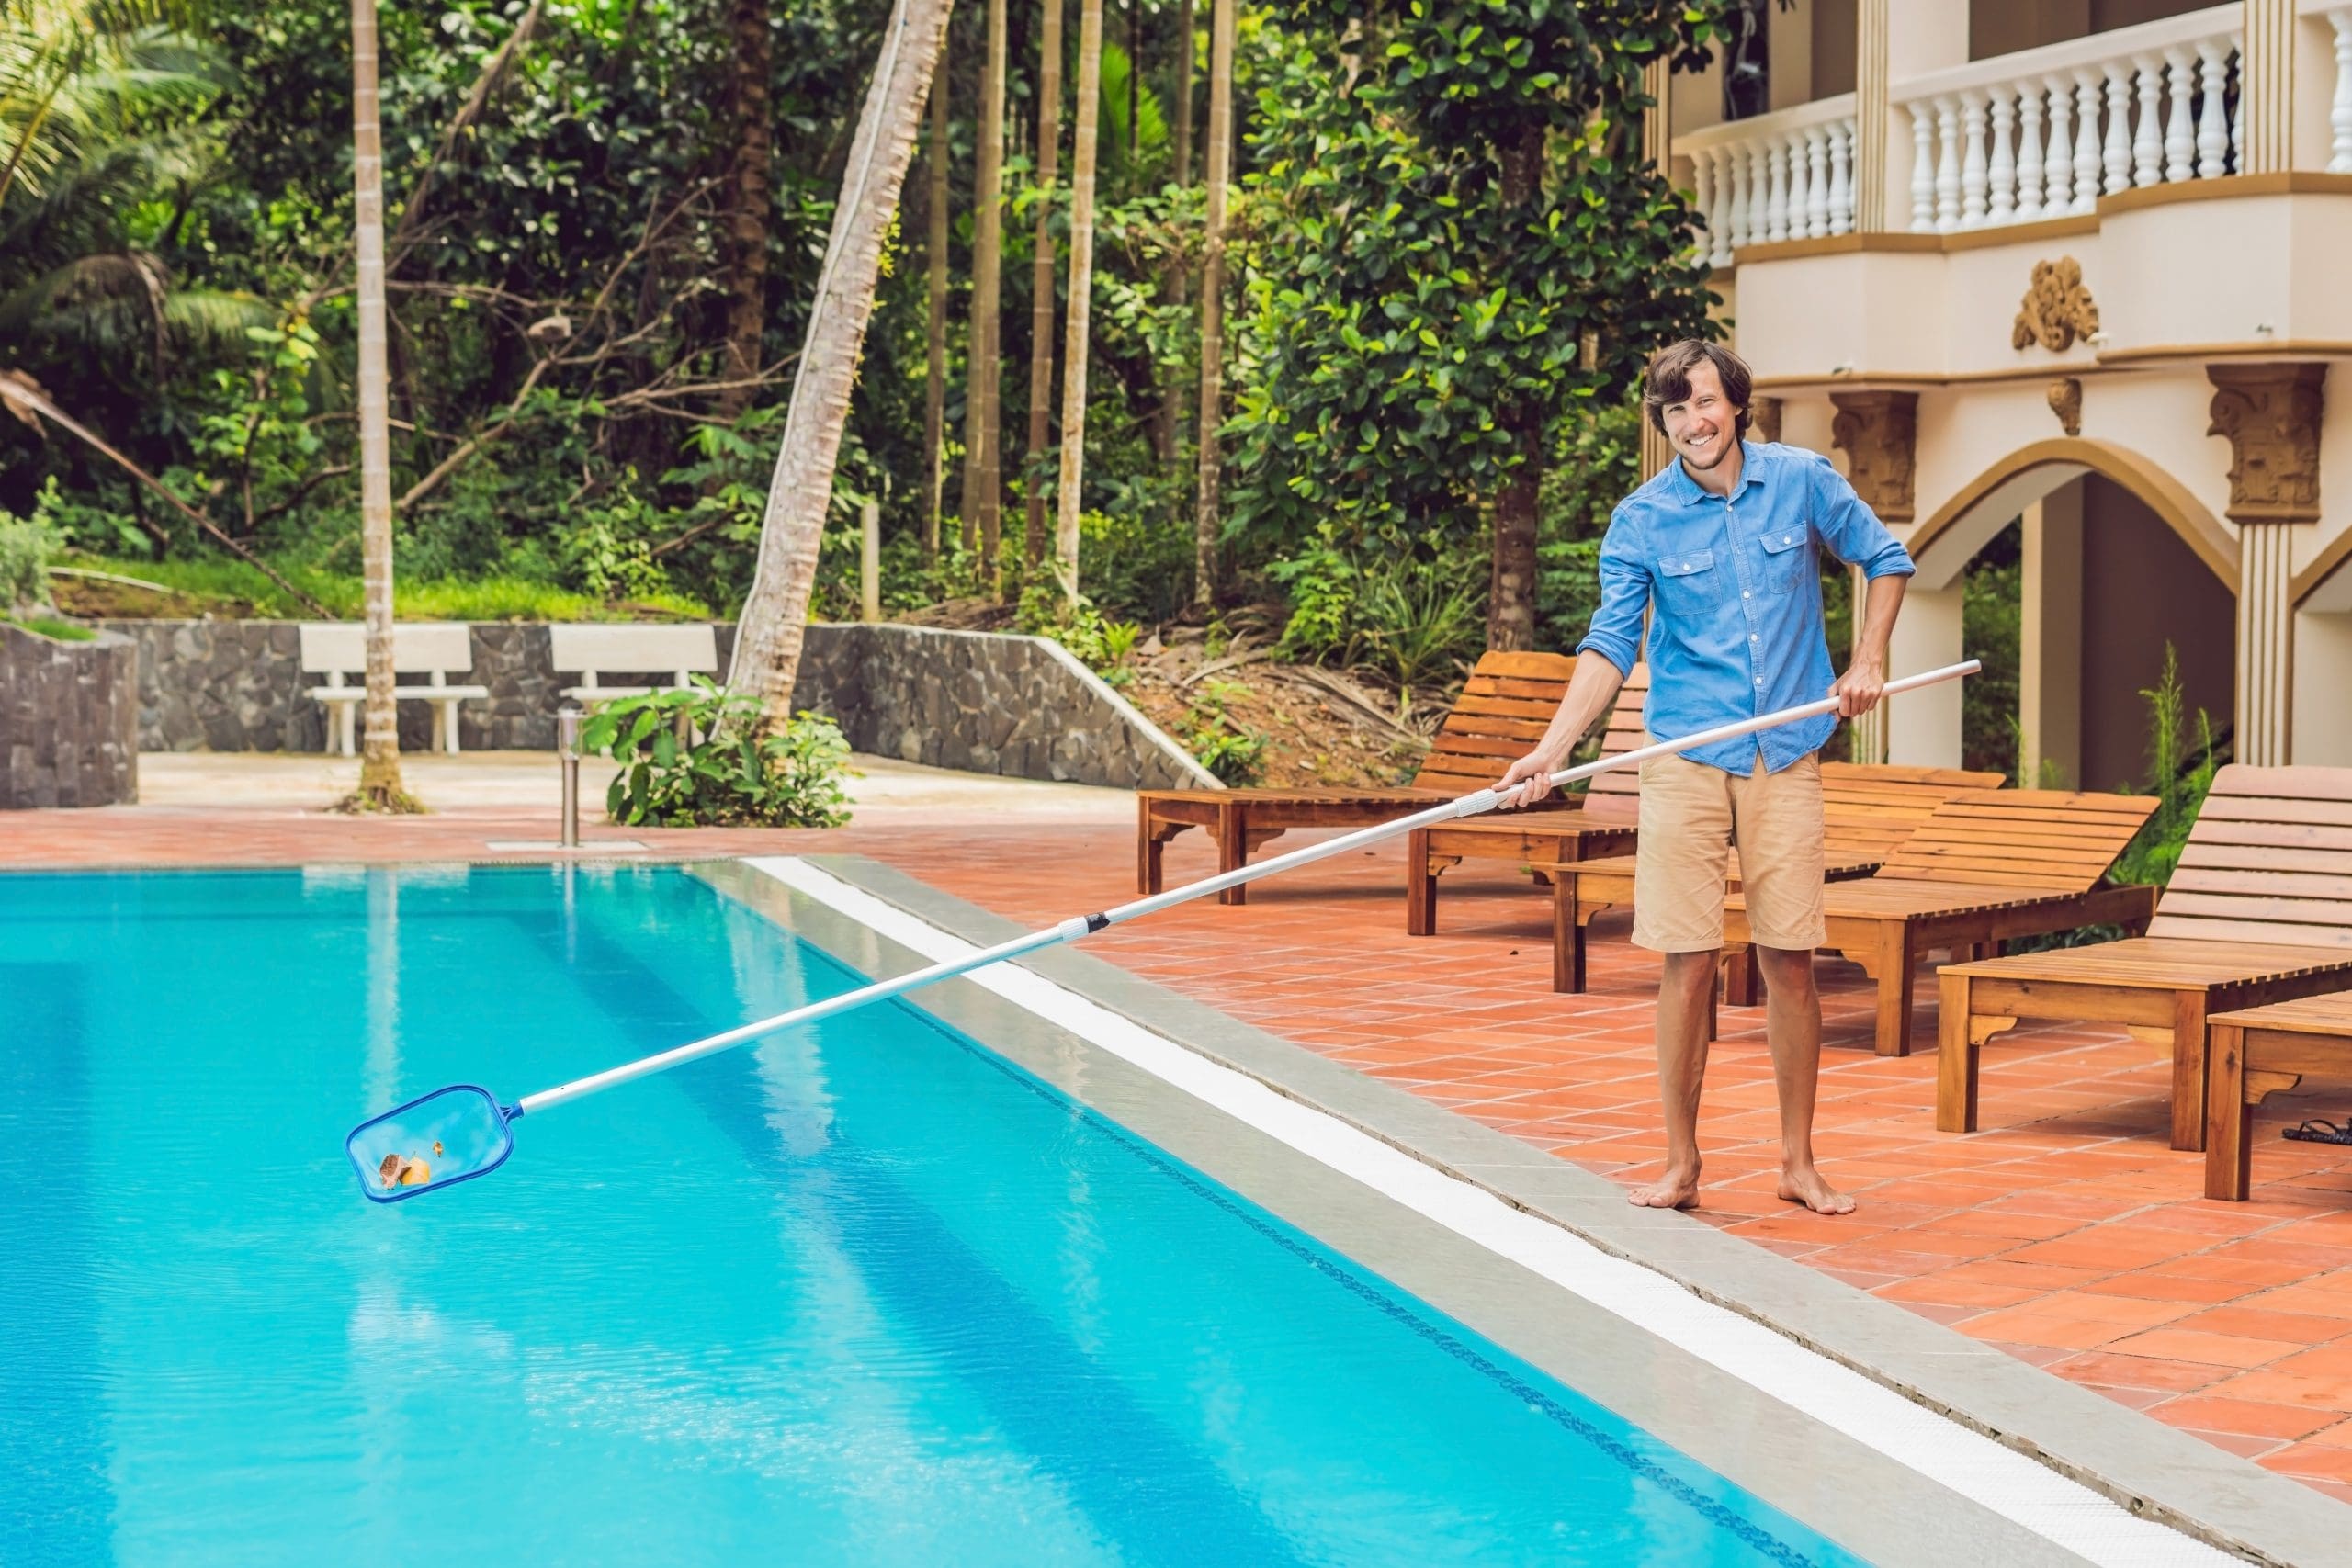 cleaner-swimming-pool-man-blue-shirt-with-skimmer-for-pool-maintenance-and-cleaning